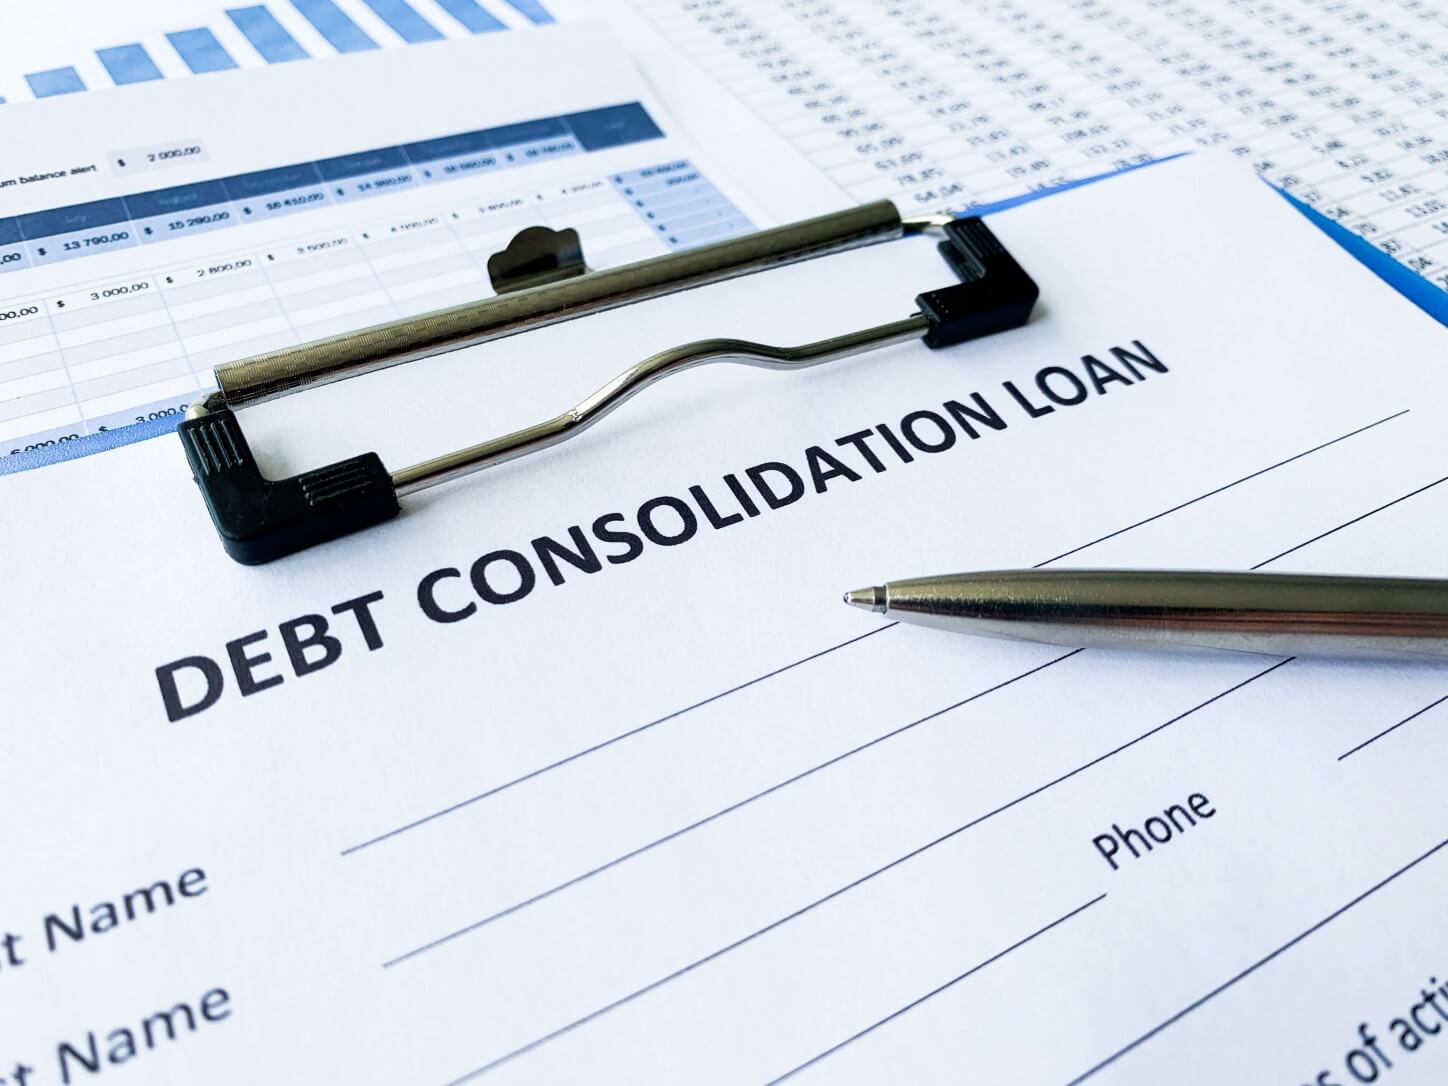 What Advantages Do You Gain with a Debt Consolidation Loan?